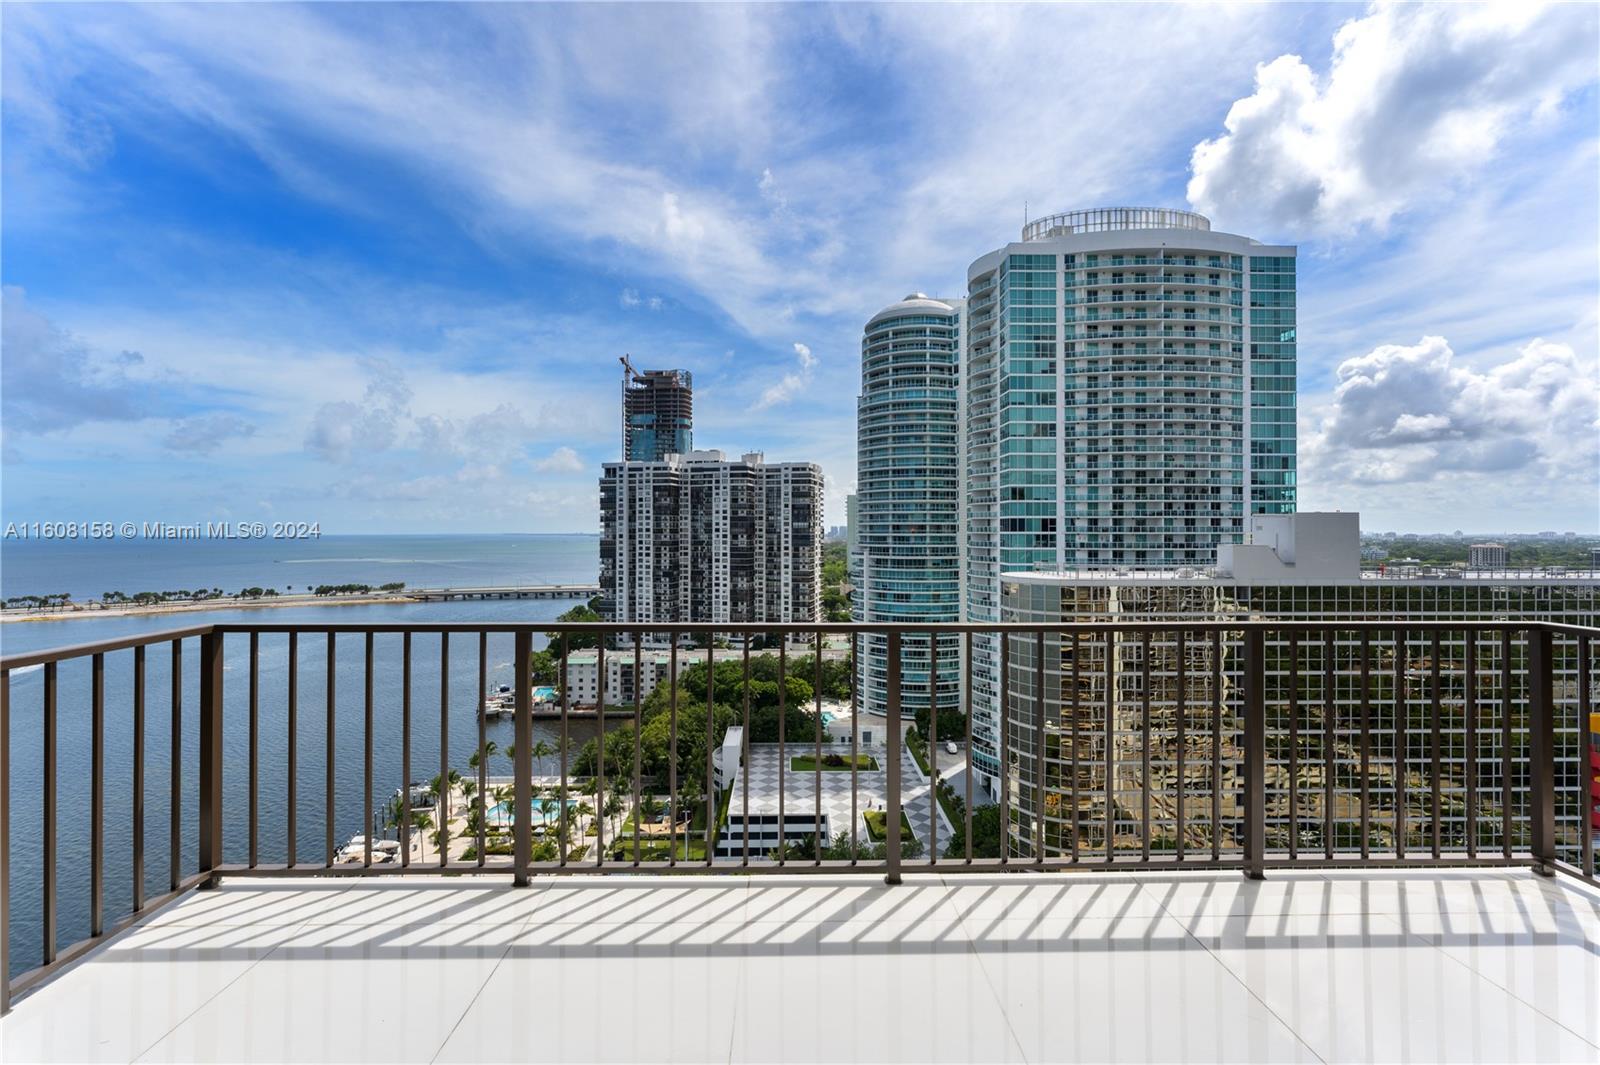 Originally 3 bedrooms converted to 2 bedrooms, which can be reconverted, this stunning TOP Floor 2-story Brickell Penthouse boasts 22' high ceilings and waterfront views. Enjoy panoramic ocean and city vistas, as well as breathtaking sunsets from every room. A striking custom stainless steel and mahogany circular staircase connects both levels, showcasing custom doors and meticulous details. The open island kitchen features top-of-the-line Thermador appliances. The master marble suite offers a Zen tub, double rain shower, and stunning bay views. Residents can indulge in amenities such as a private pool, cabanas, hot tub, children's pool and playground, 6 tennis, racquet, and basketball courts, state-of-the-art gym, party room, private marina, and BBQ area by the water's edge.